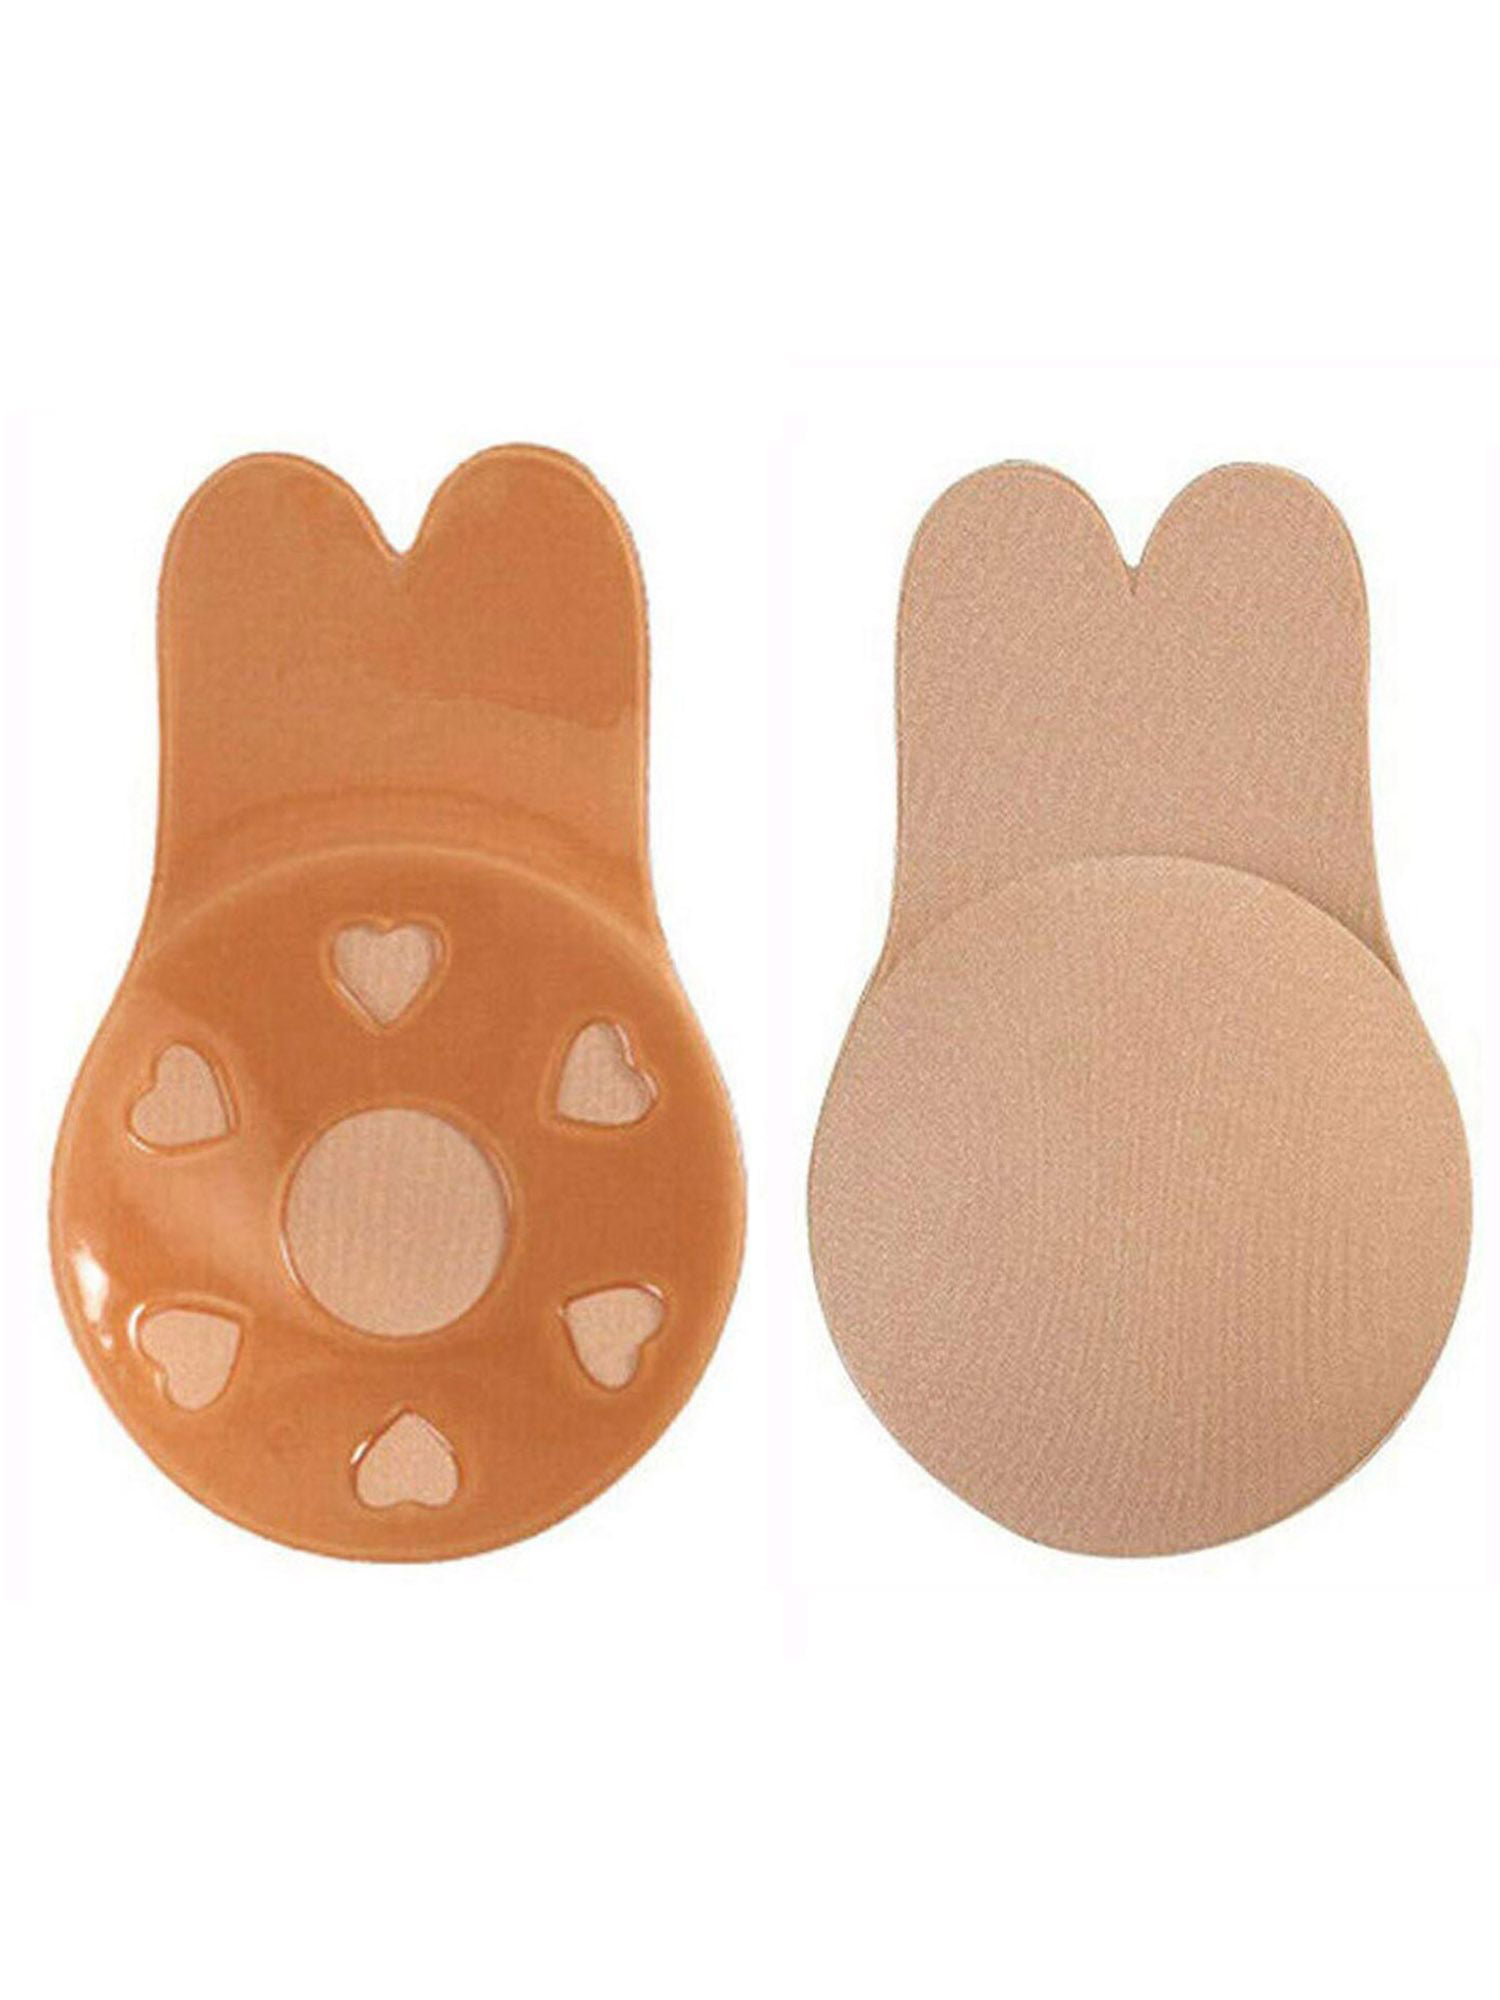 PULLIMORE Rabbit Ear Self Adhesive Invisible Bra Breast Lifting Push Up  Strapless Backless Nipple Covers for Wedding Party 